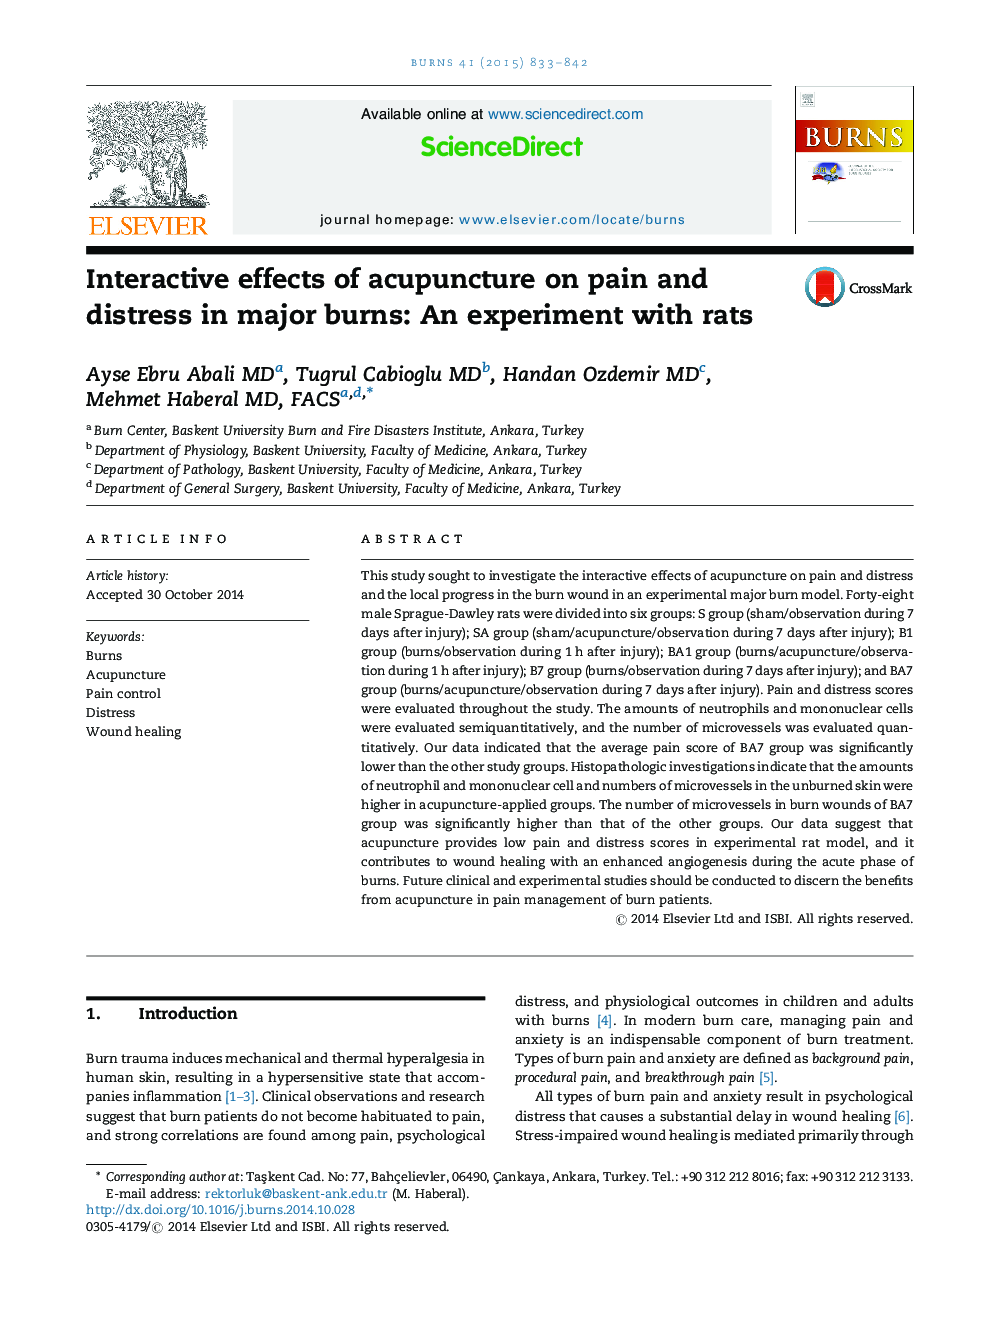 Interactive effects of acupuncture on pain and distress in major burns: An experiment with rats